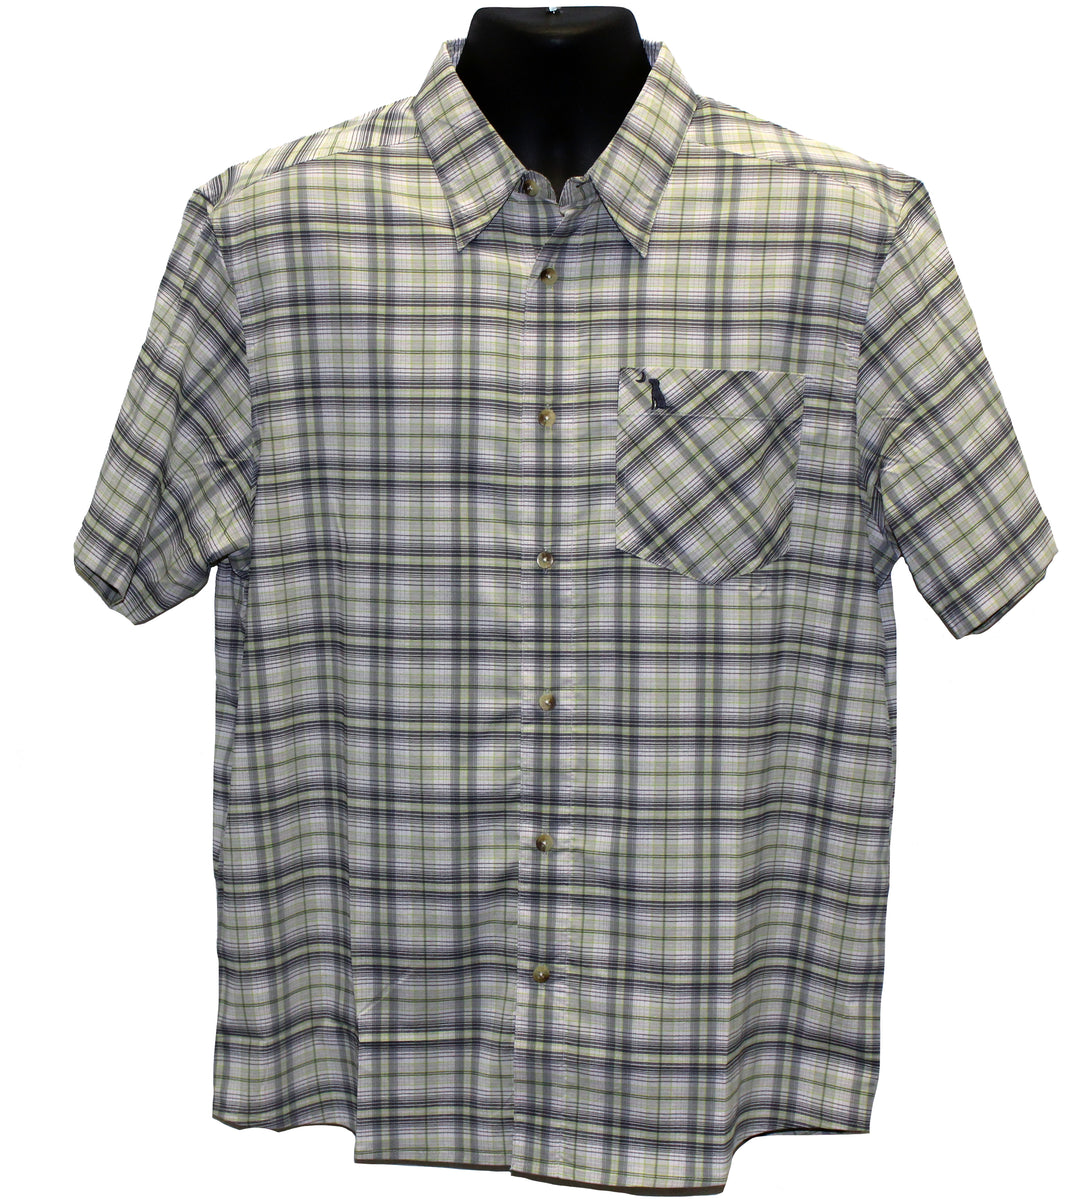 BEACH-COMBER BUTTON UP – Local Boy Outfitters